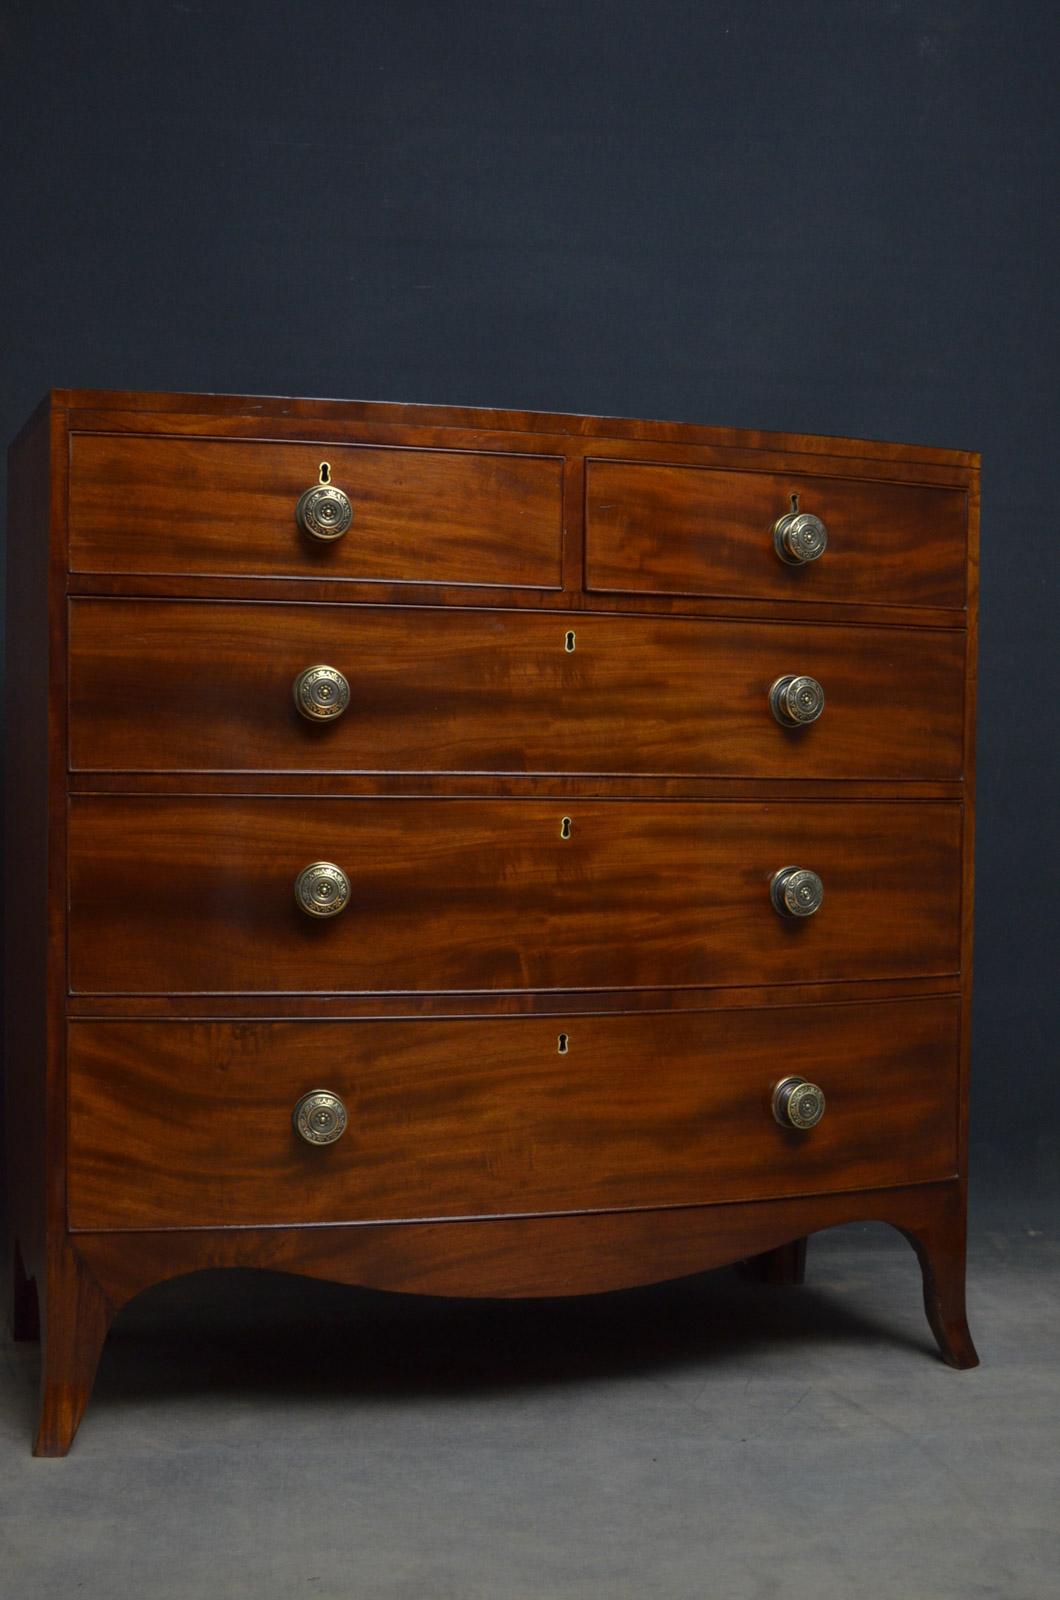 English Regency Bowfronted Chest of Drawers in Mahogany